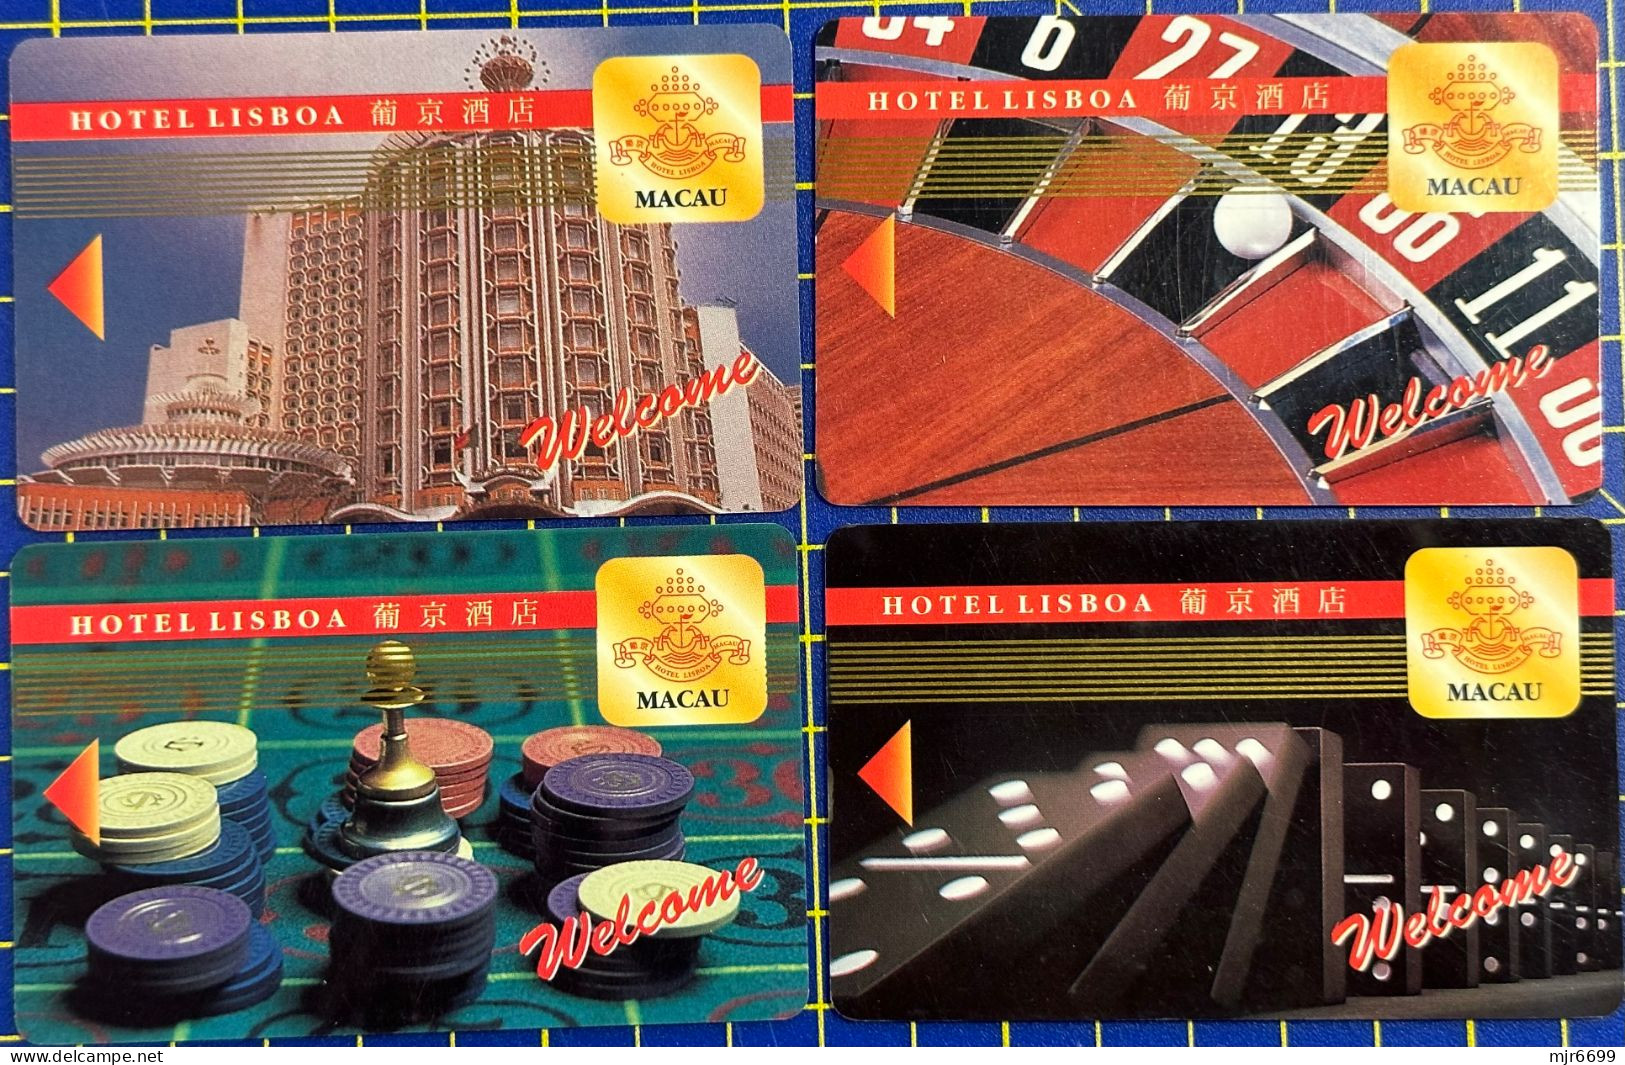 SET OF 4, HOTEL LISBOA ELECTRONIC ROOM KEY CARDS, GAMBLING THINGS RELATED, USED, CLEARING STOCK, C PICTURES. - Macao